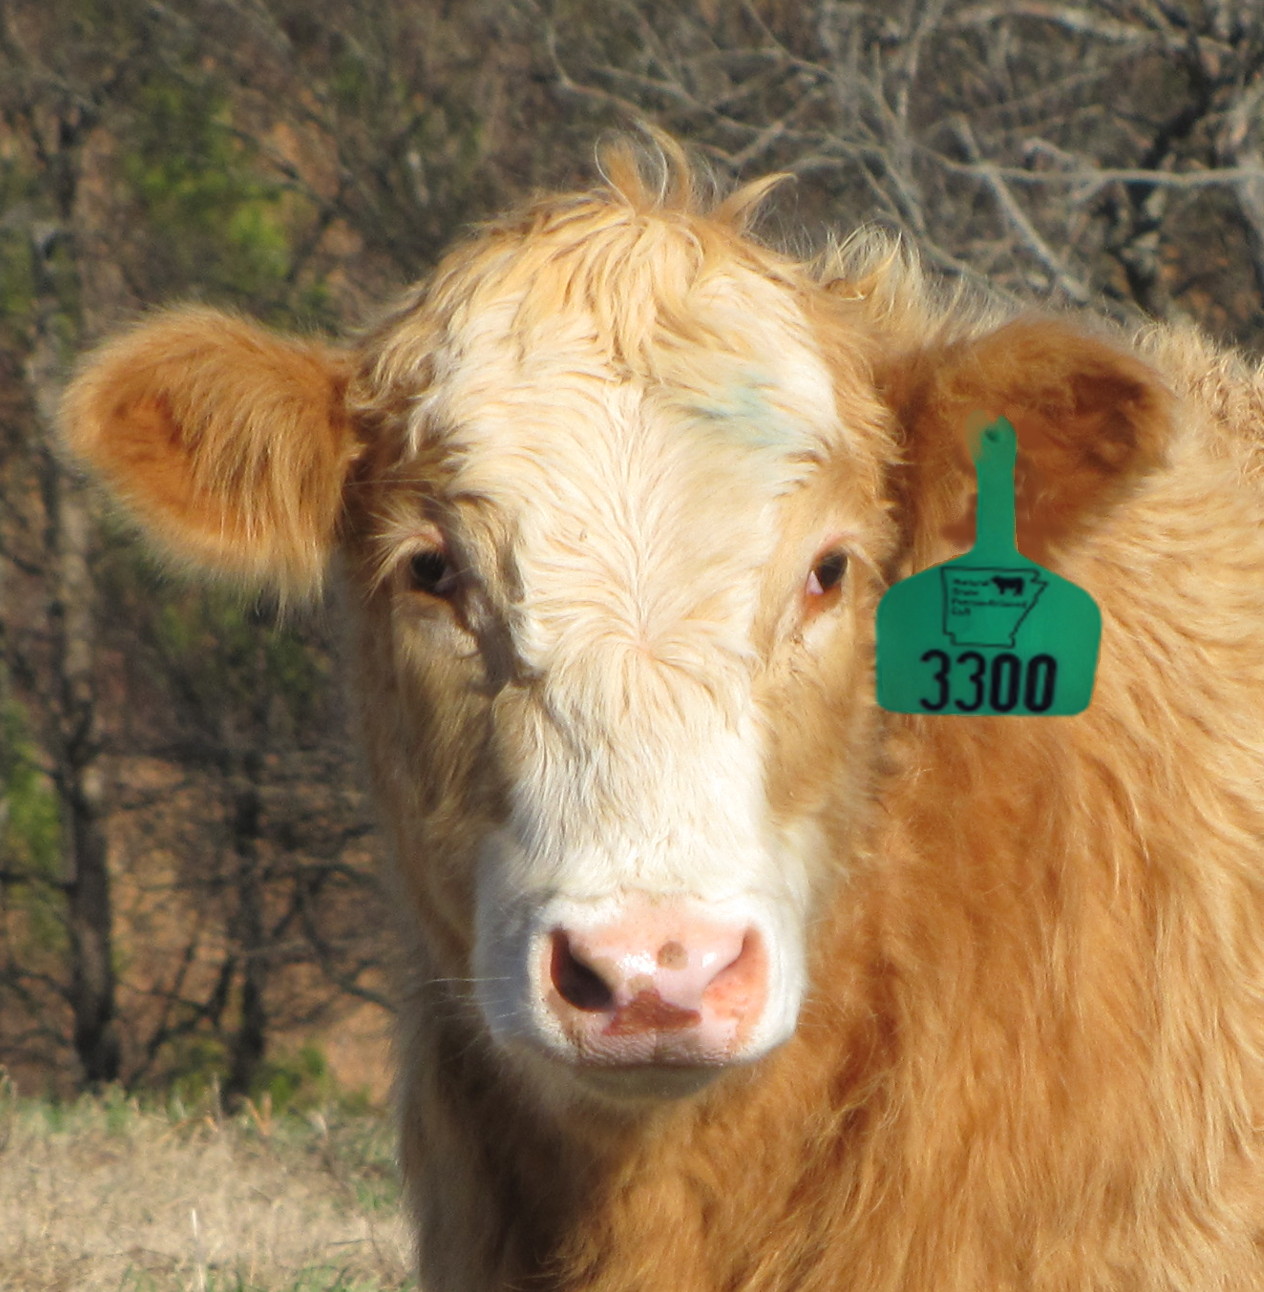 Image of calf with green ear tag